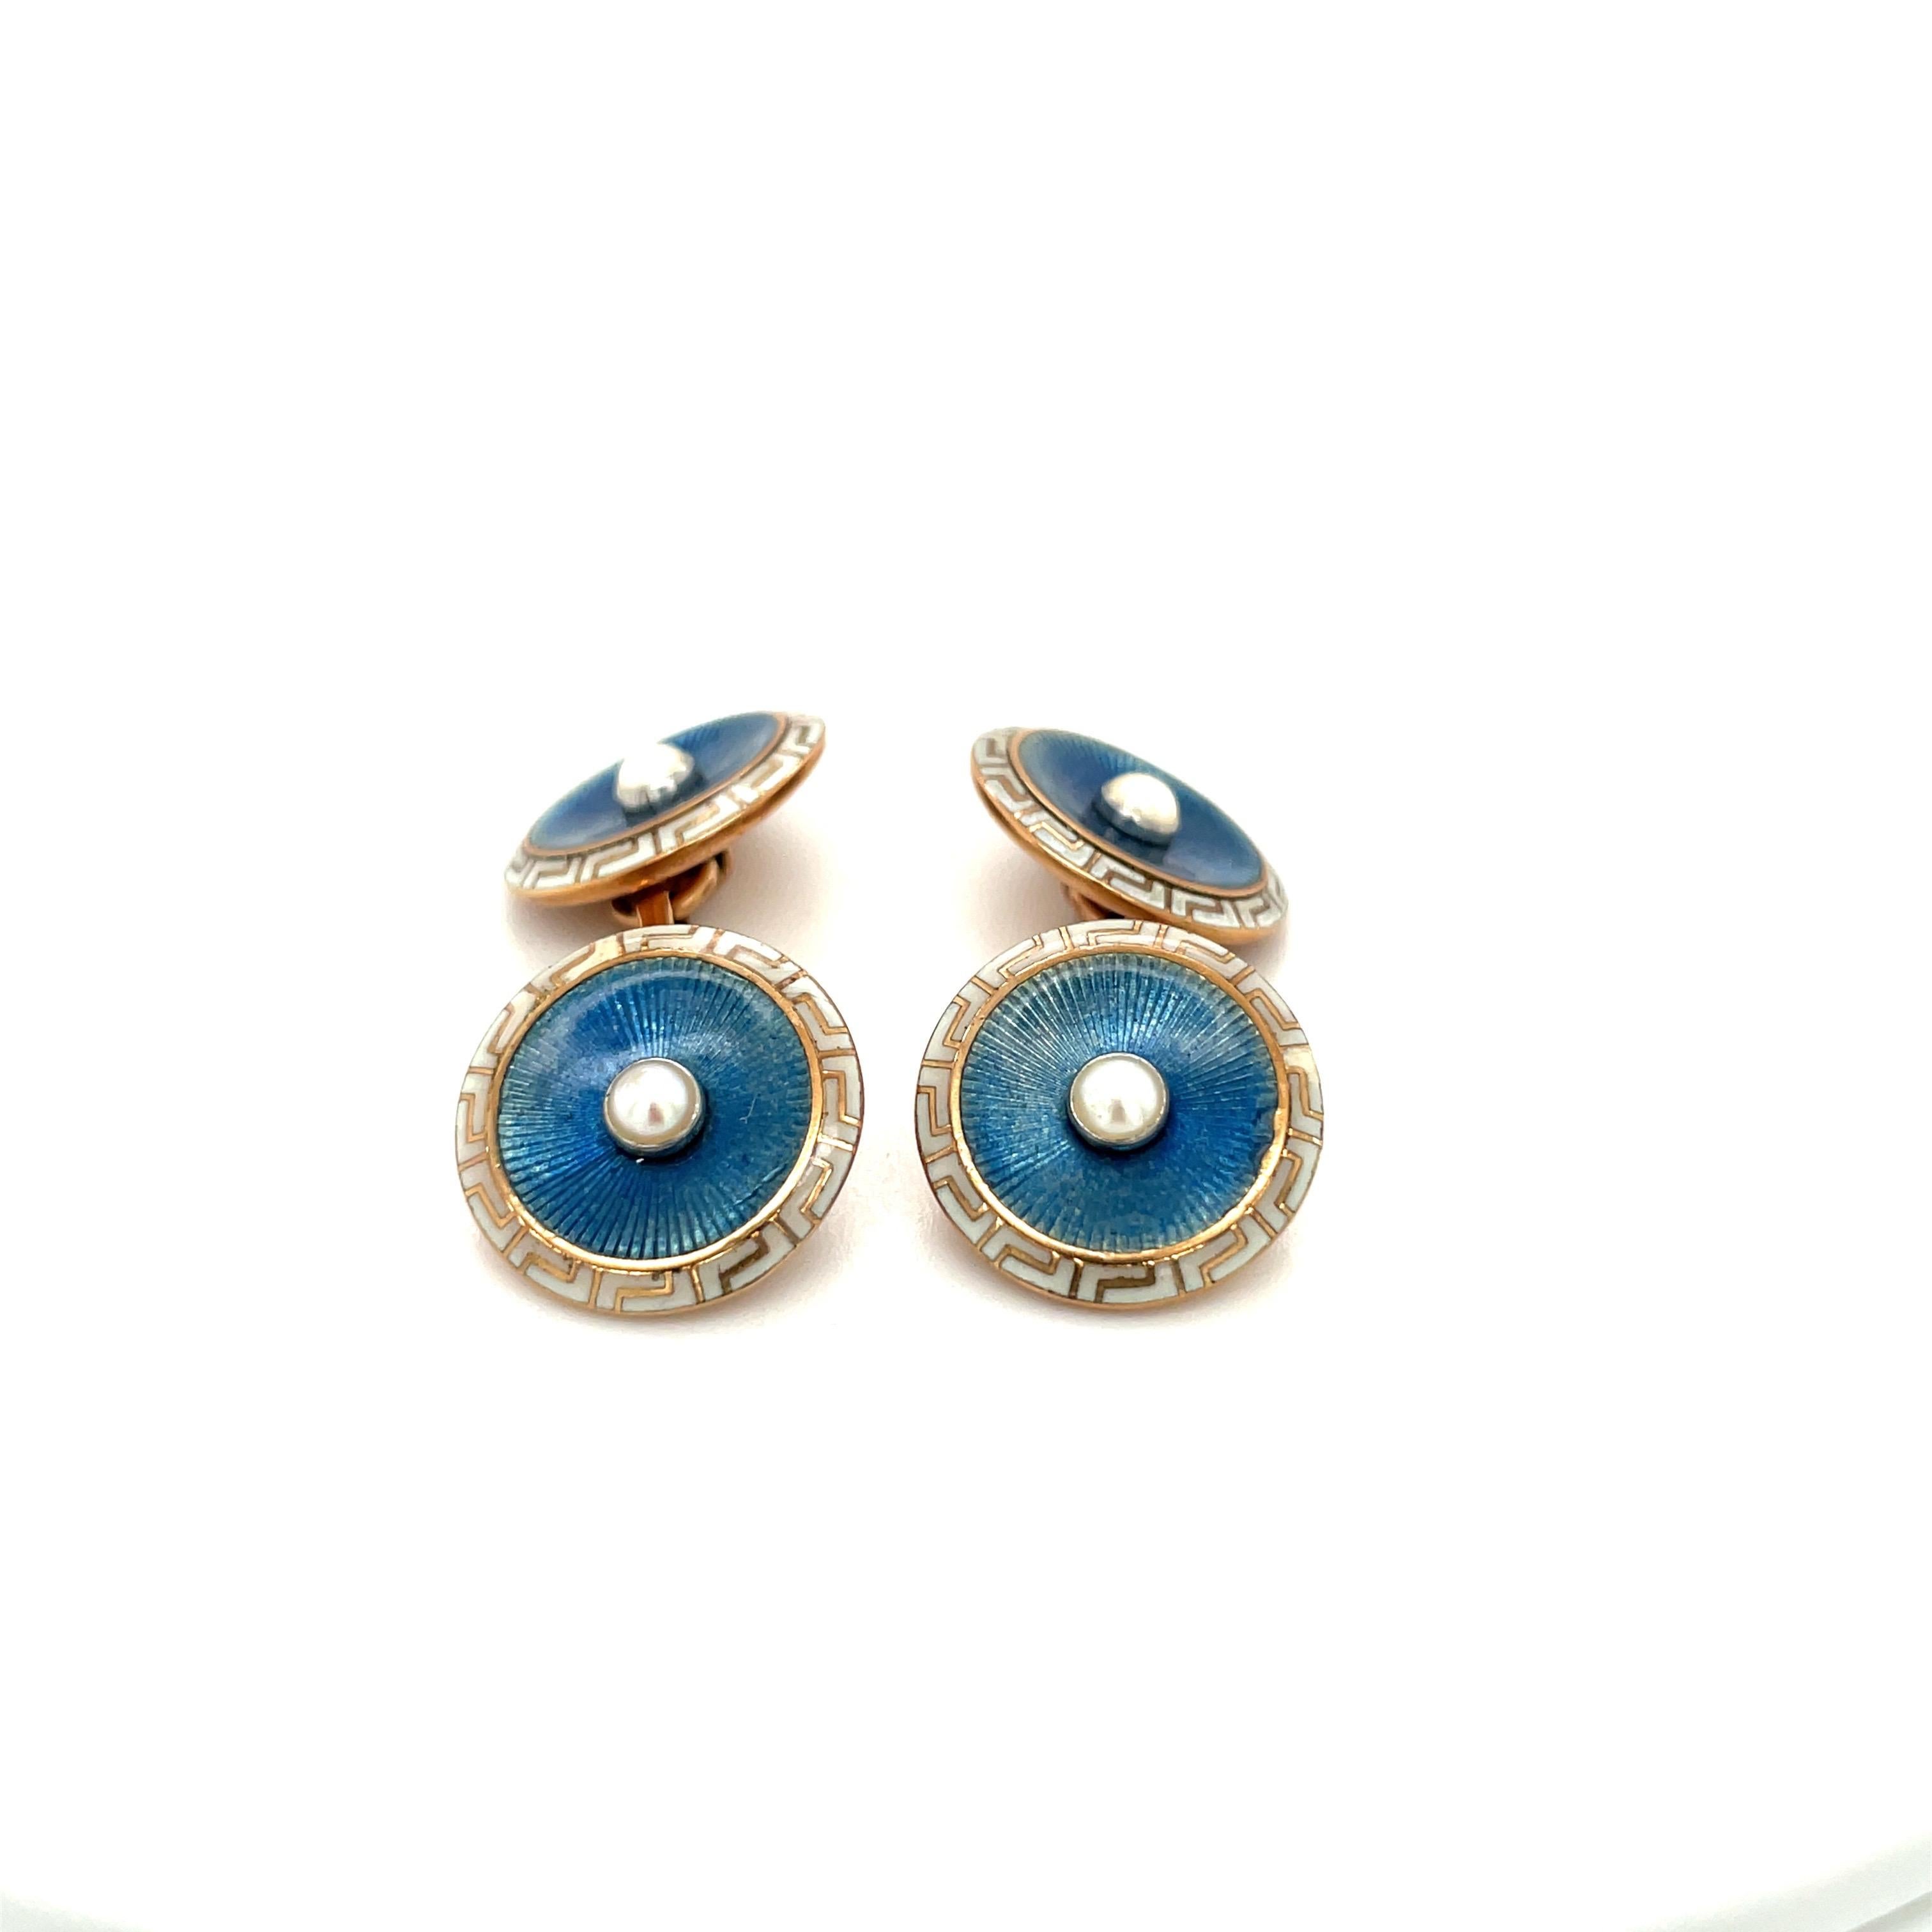 Classic 18 karat rose gold and enamel cuff links. The round cuff links are crafted with a chambray blue enamel center trimmed with a cream enamel with a Greek key design. A small pearl centers each of the 4 rounds.